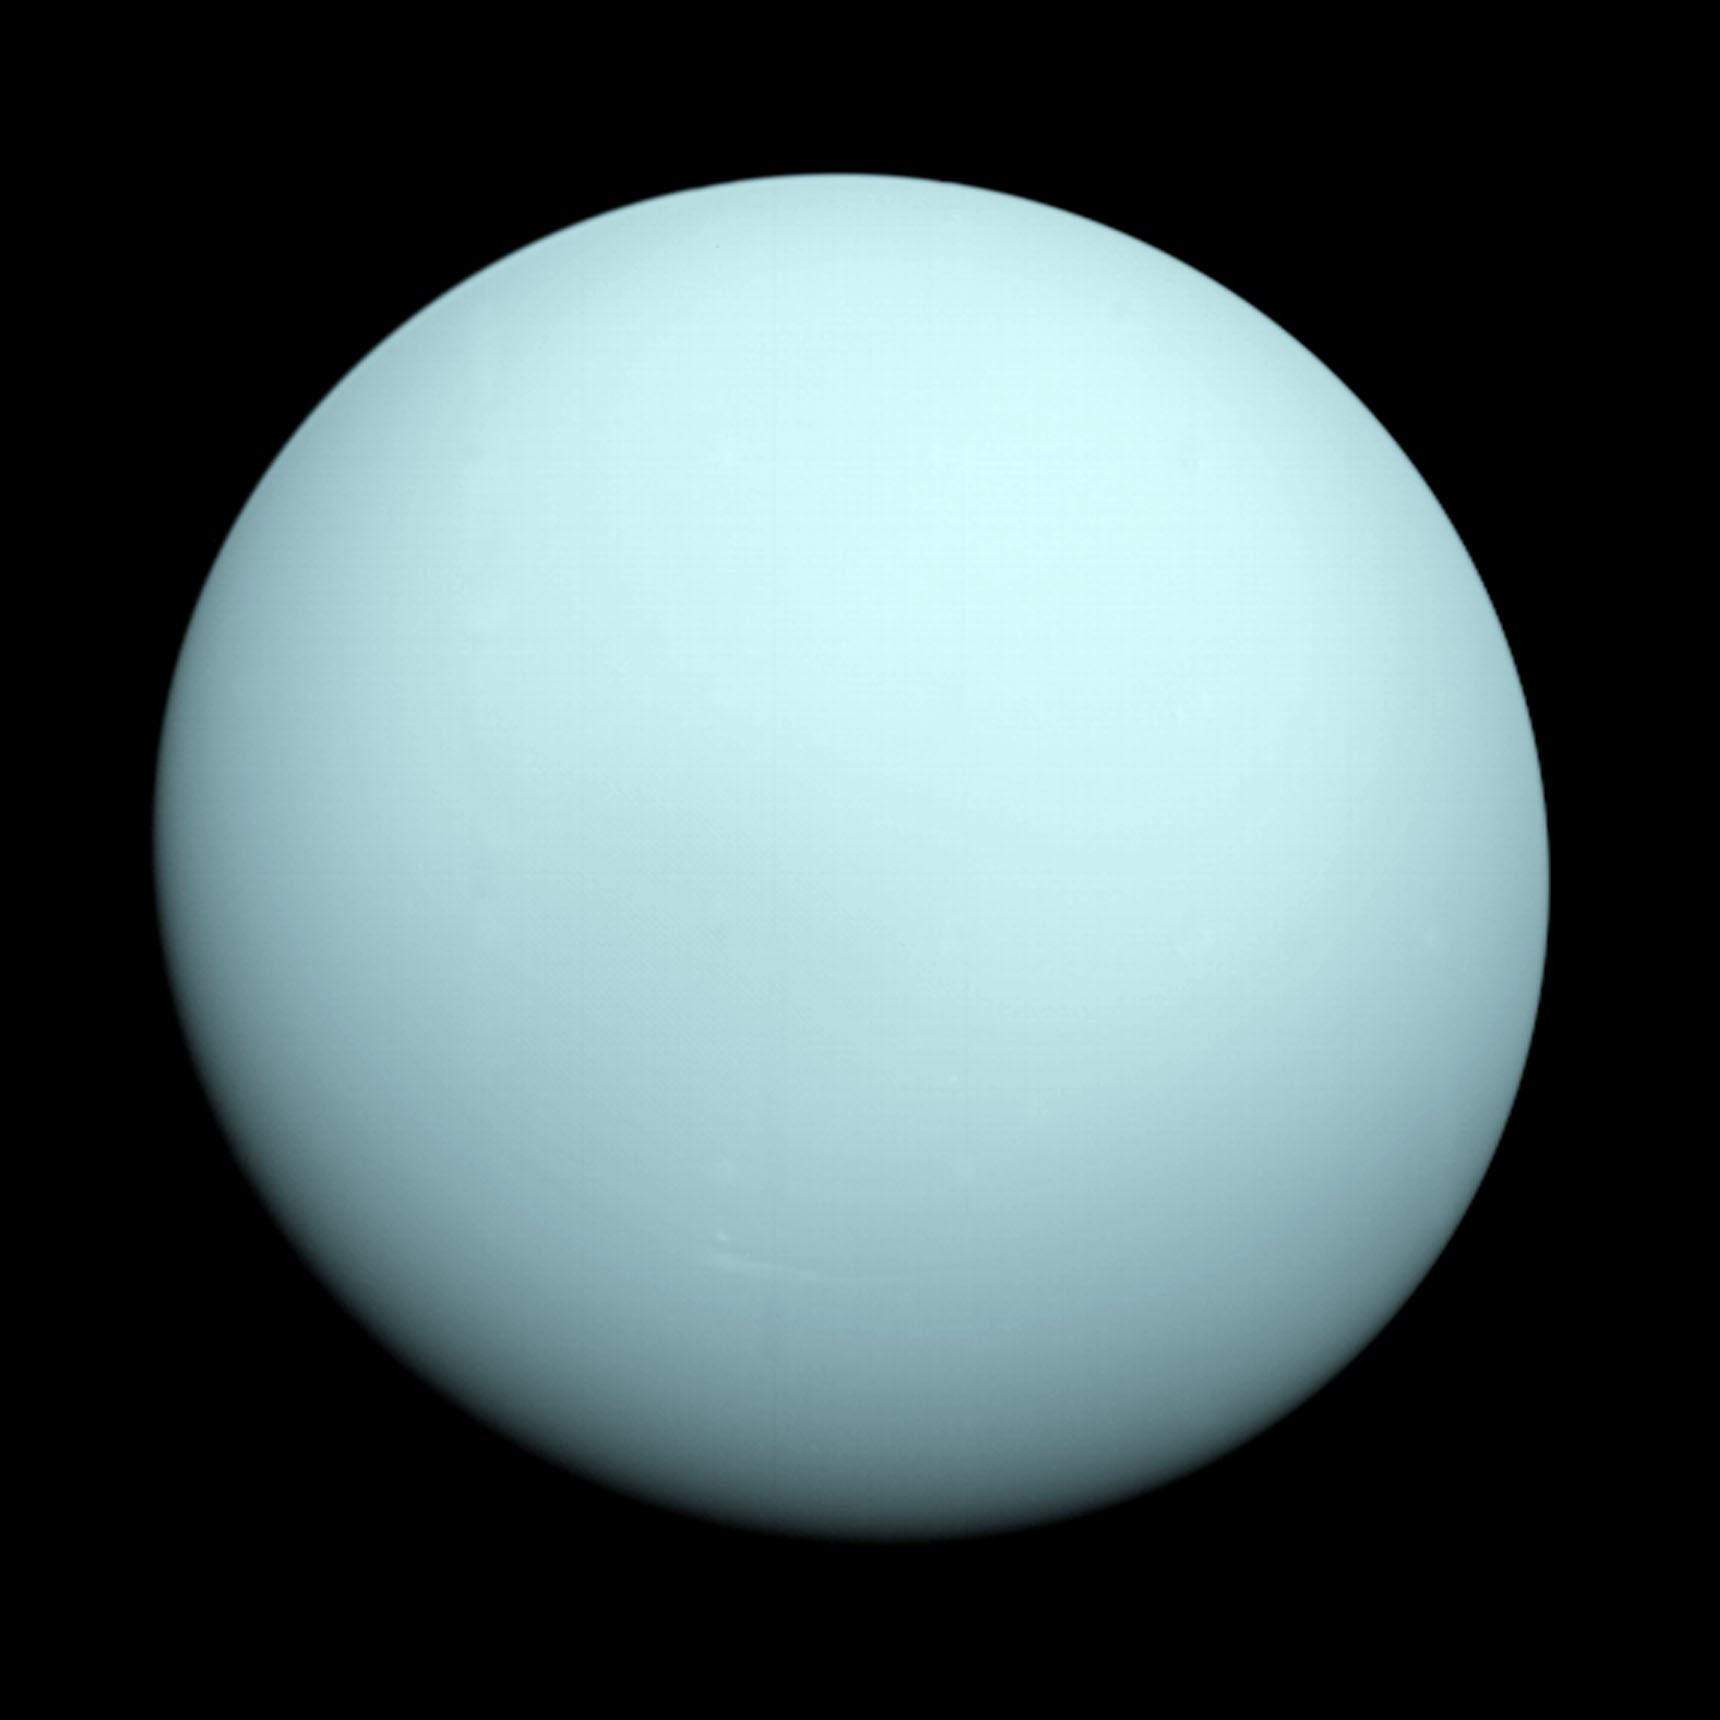 This is an image of the planet Uranus taken by the spacecraft Voyager 2 on January 14th 1986 from a distance of approximately 7.8 milllion miles ( 12.7 million km ).